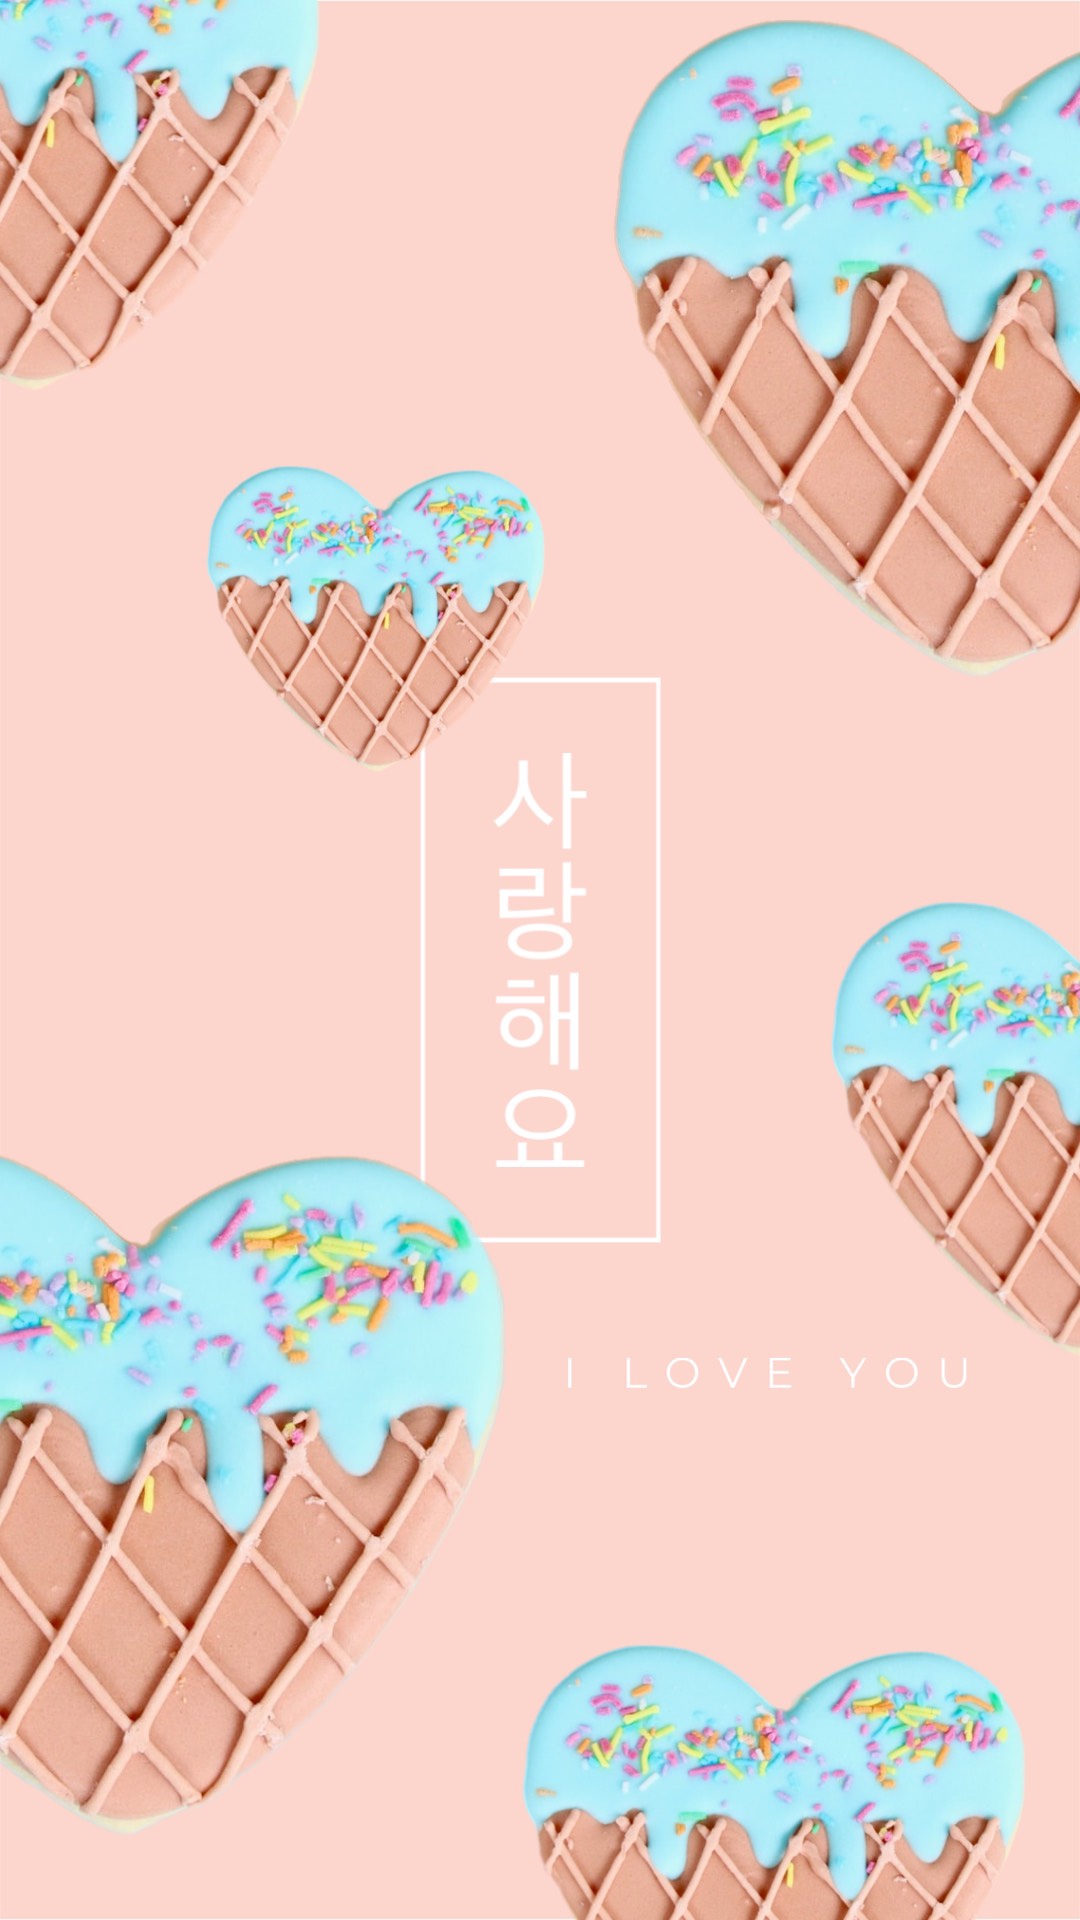 Korea white day pastel hearts instagram story template